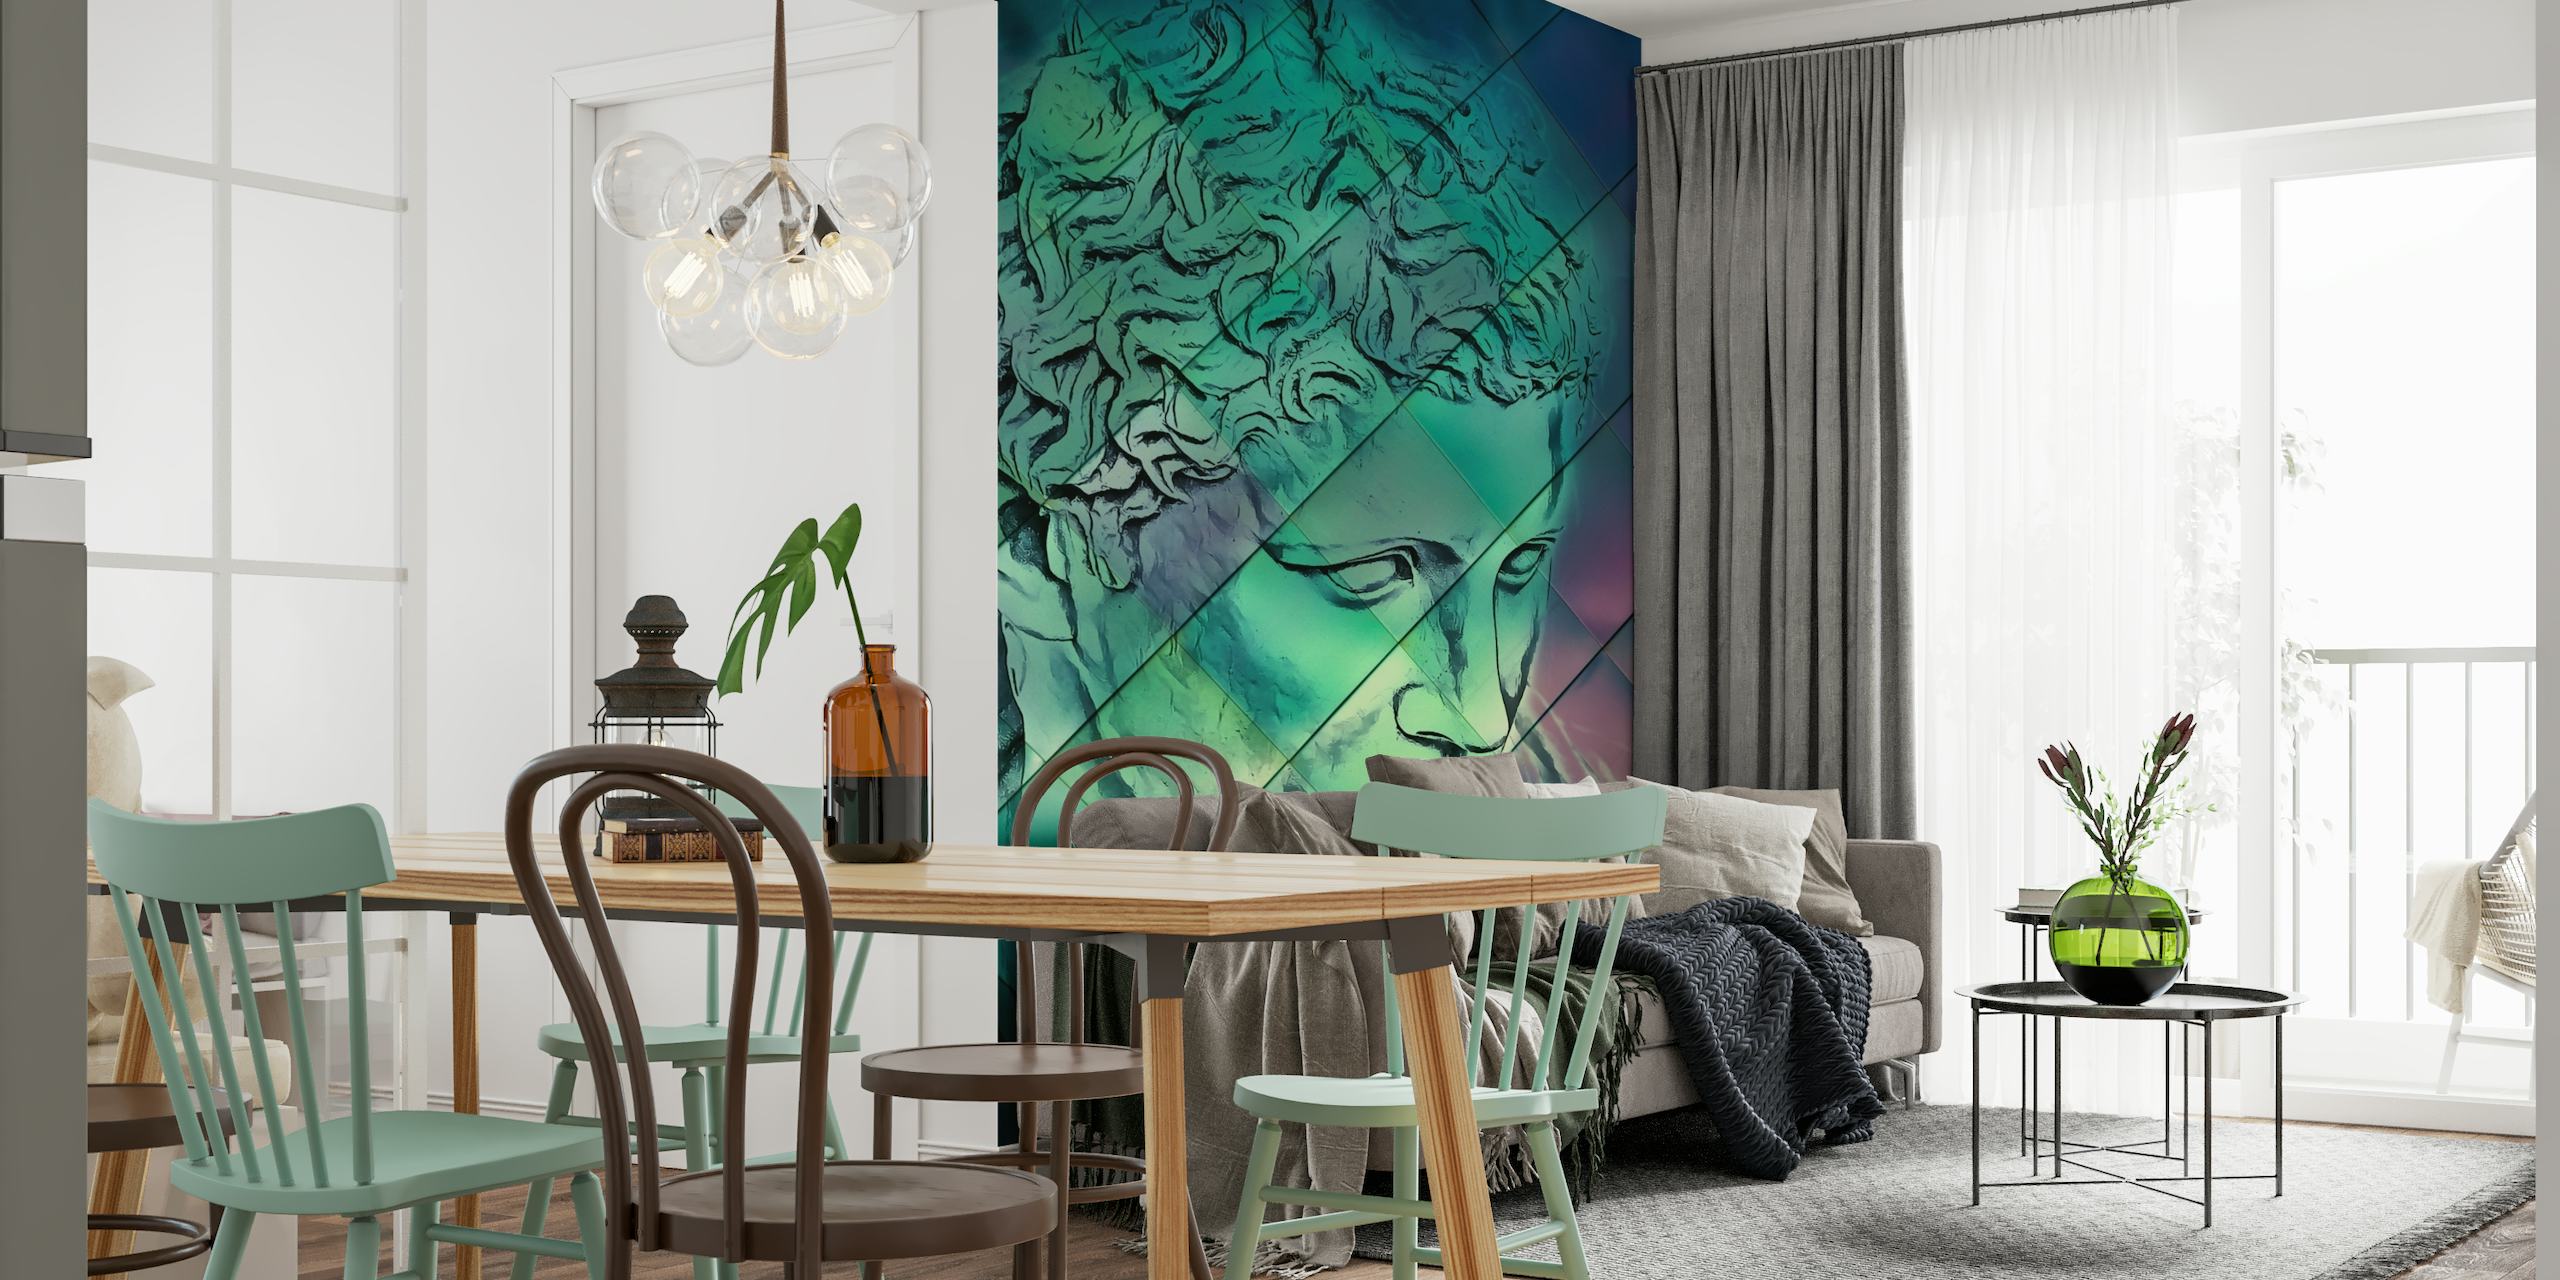 Artistic representation of classical Roman sculpture with a modern colorful twist suitable for wall murals